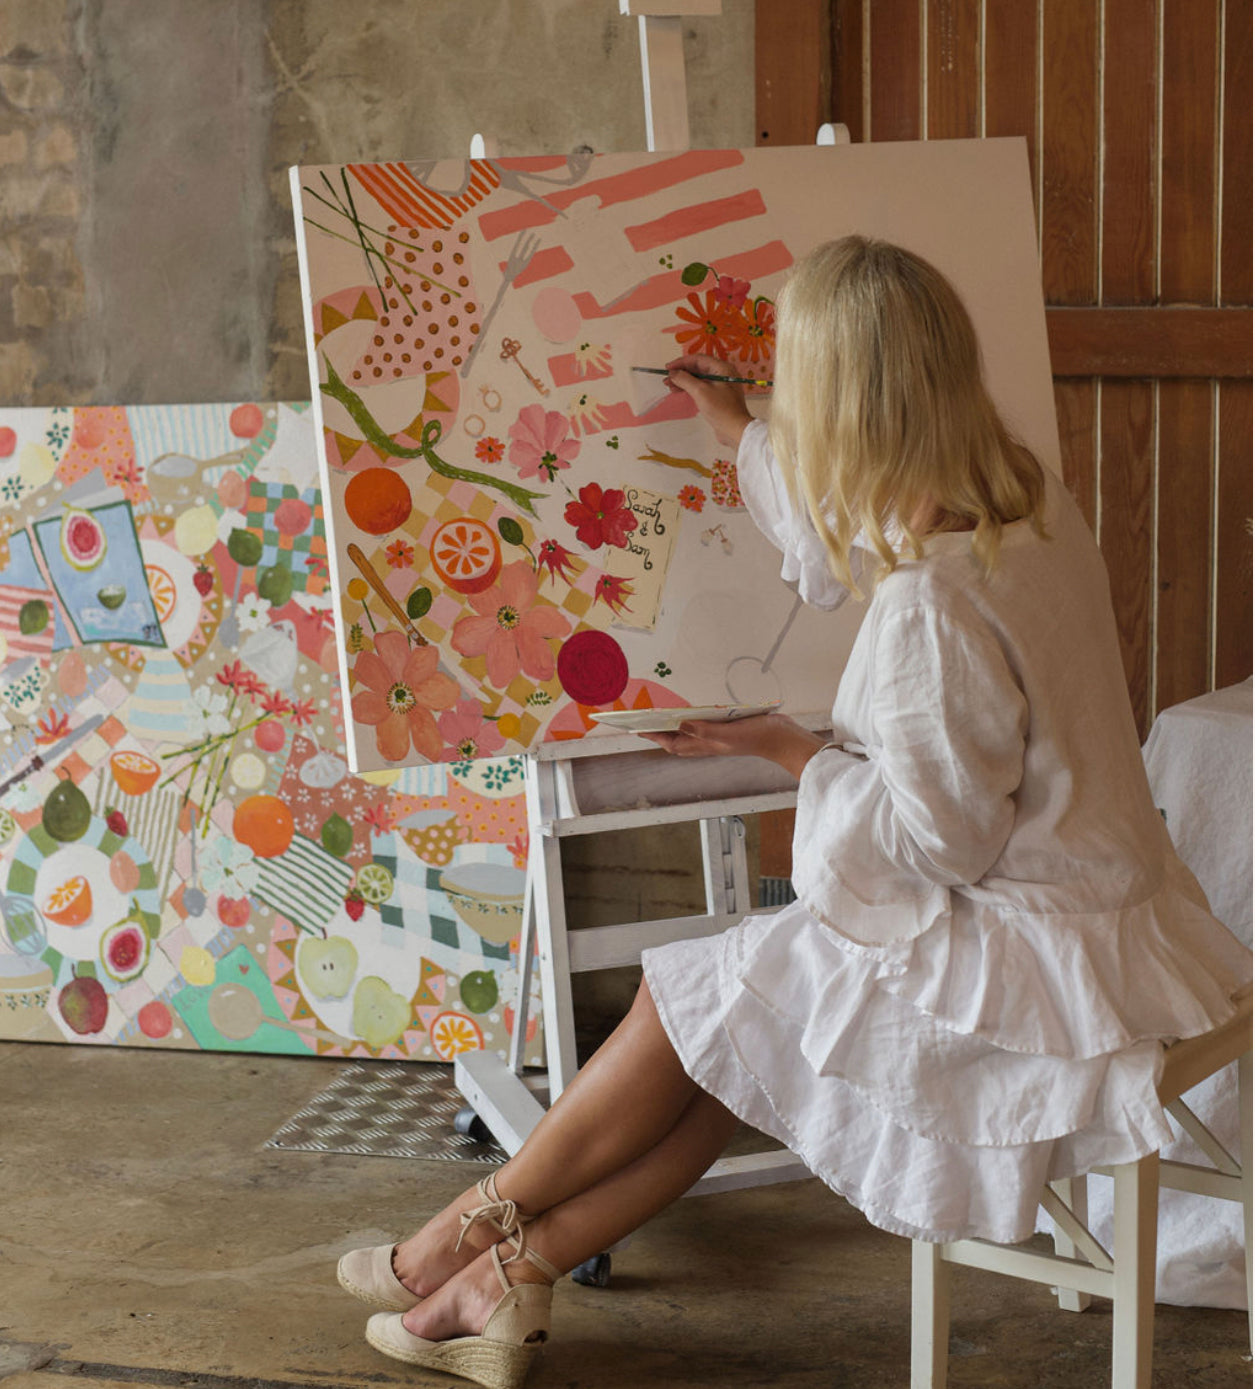 LIVE WEDDING + SPECIAL EVENT PAINTING FLORALS + ABSTRACT STILL LIFE